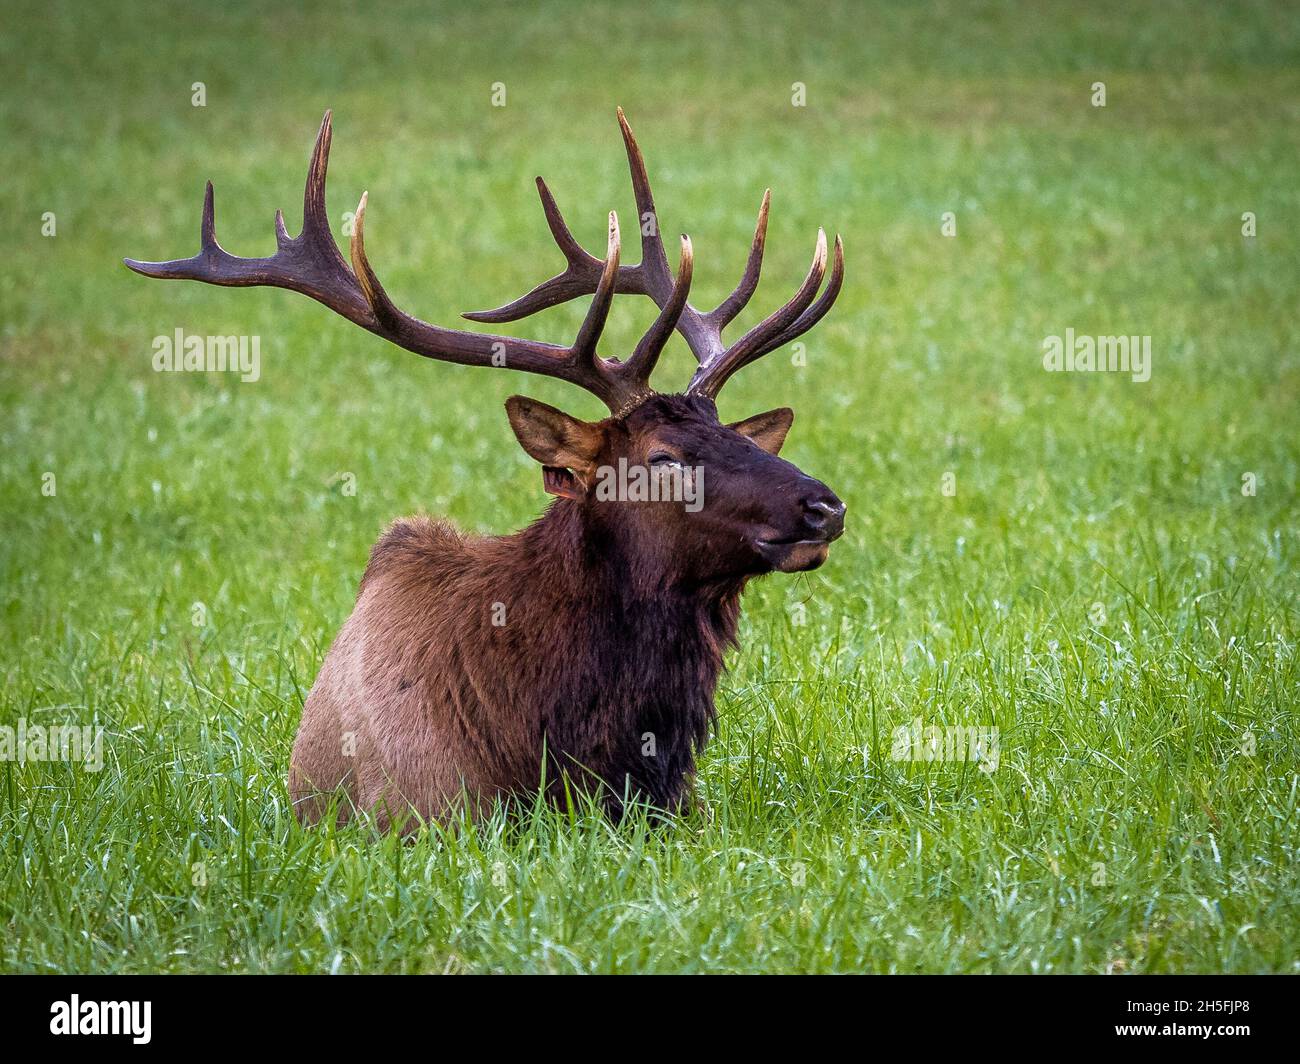 A single male Elk or  Manitoban Elk, in a field near Oconaluftee Visitor Center in Great Smoky Mountains National Park in North Carolina USA Stock Photo